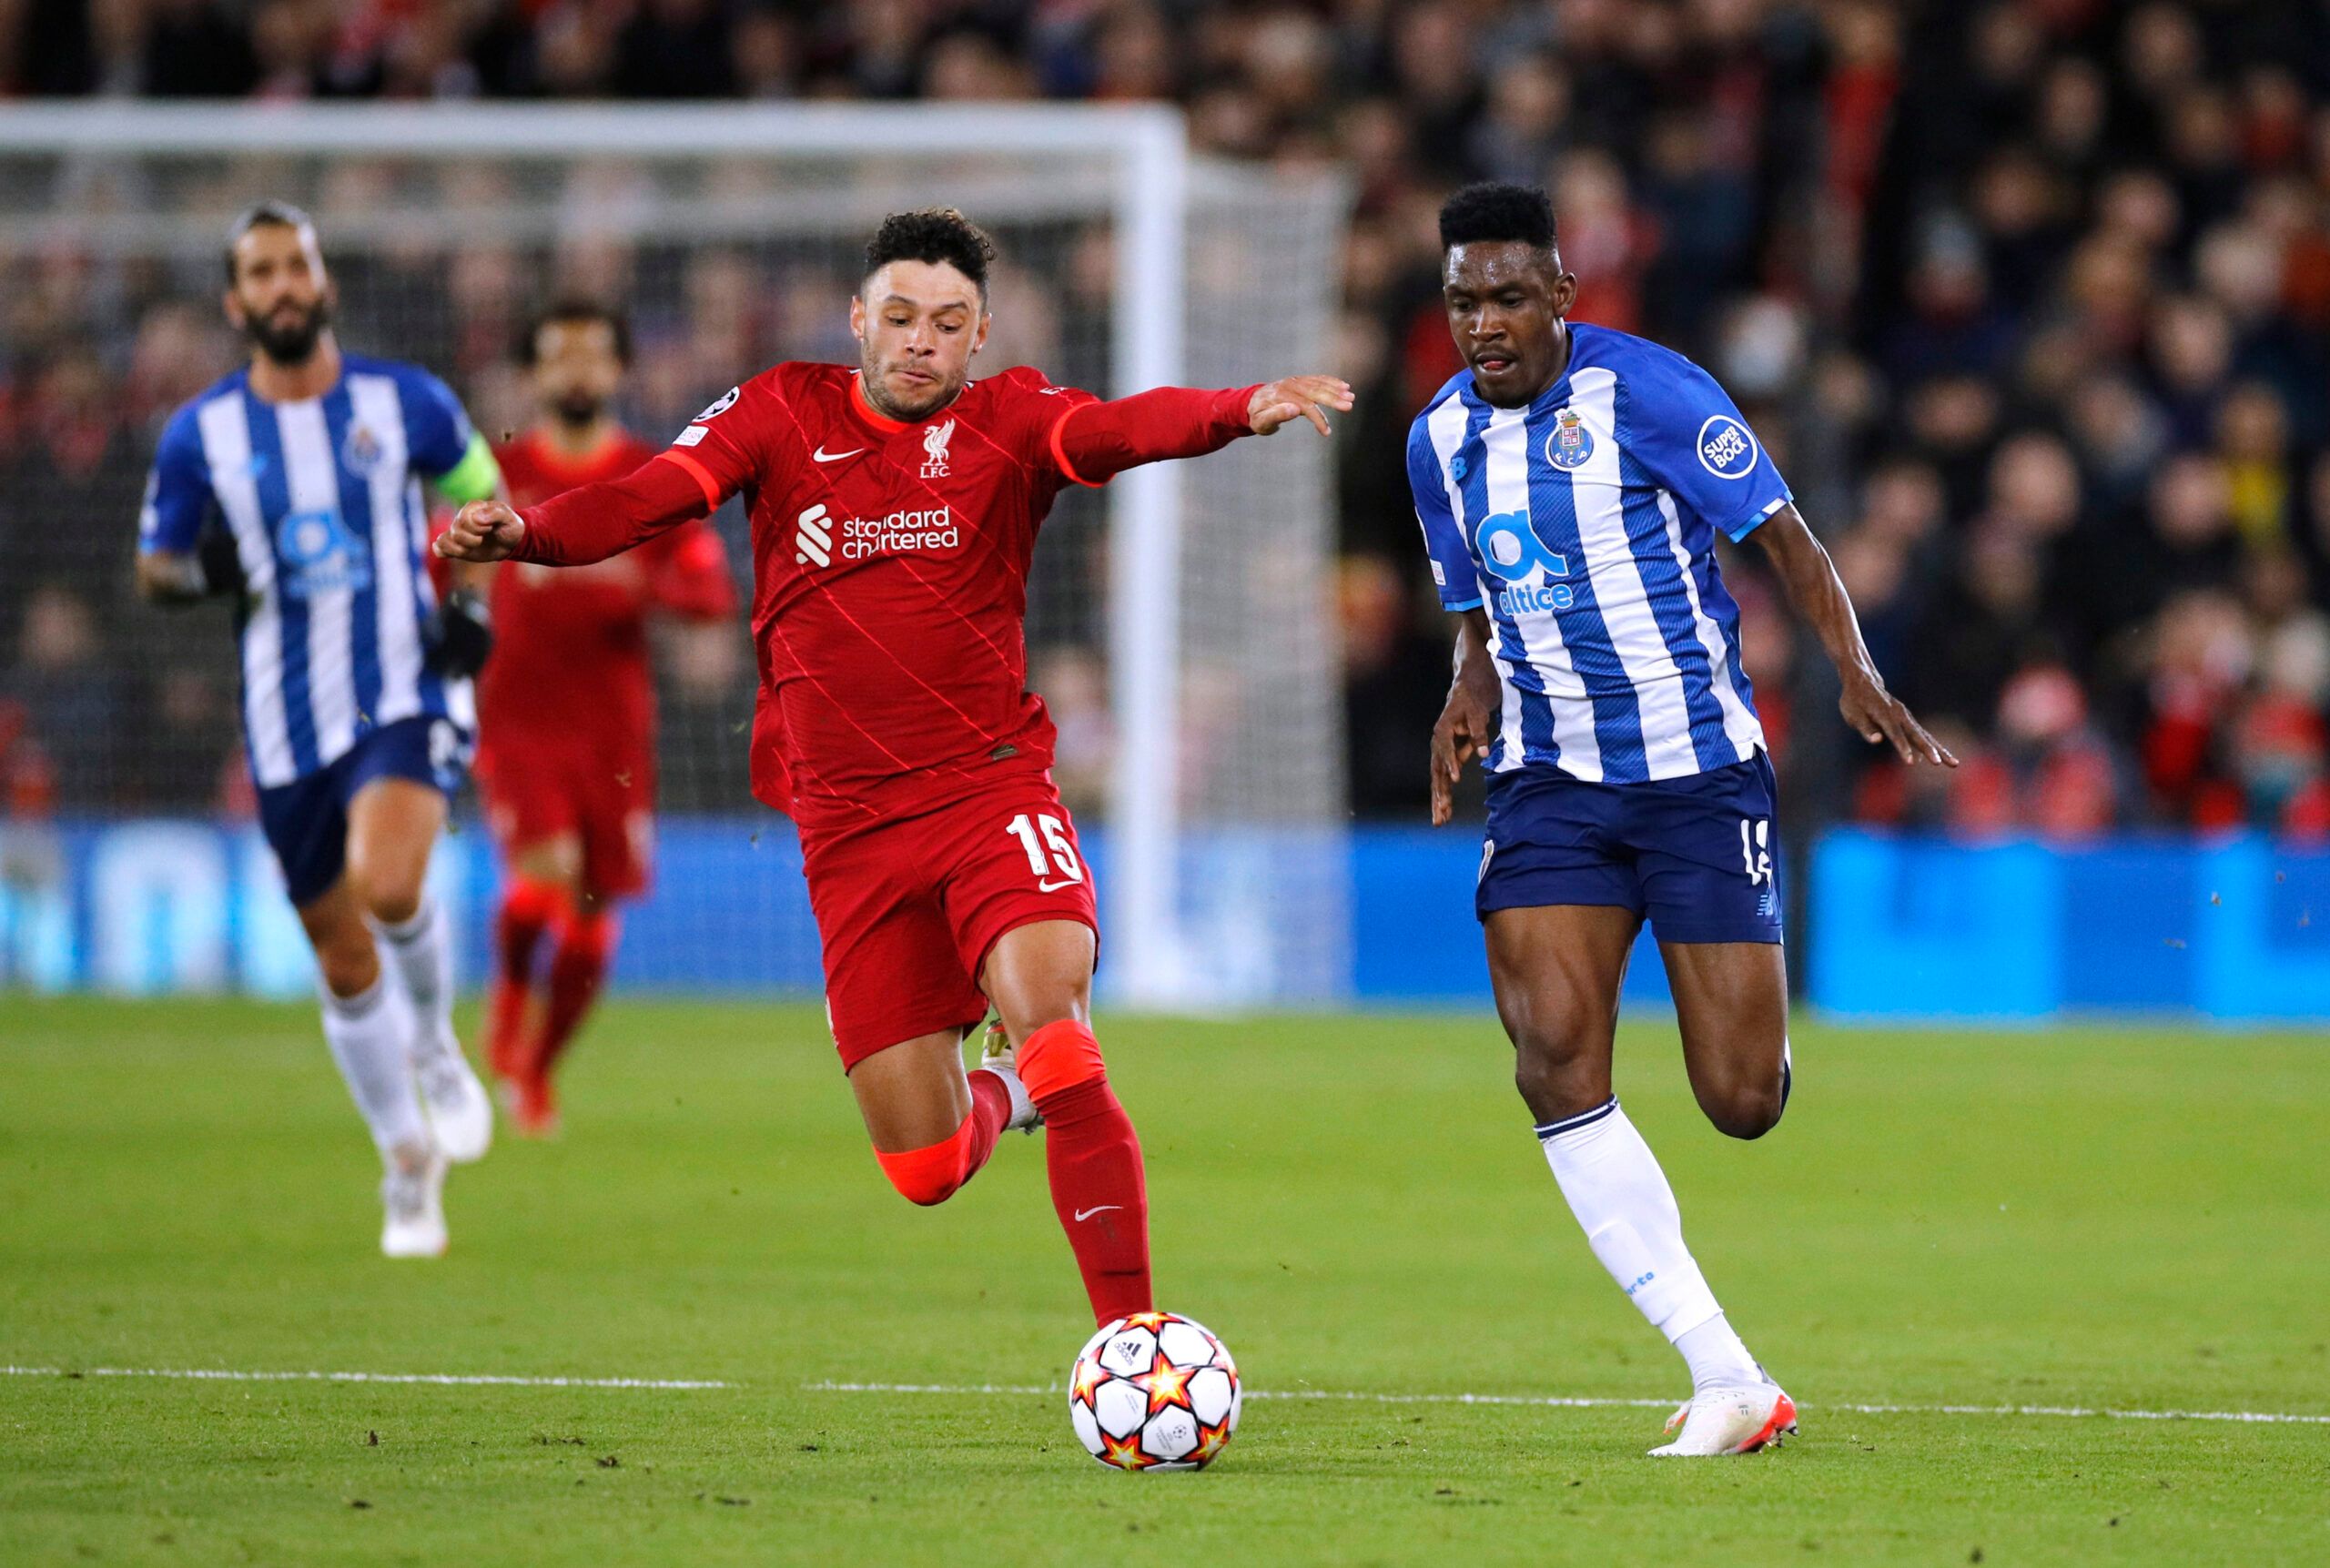 Soccer Football - Champions League - Group B - Liverpool v FC Porto - Anfield, Liverpool, Britain - November 24, 2021 Liverpool's Alex Oxlade-Chamberlain in action with FC Porto's Zaidu Sanusi REUTERS/Phil Noble